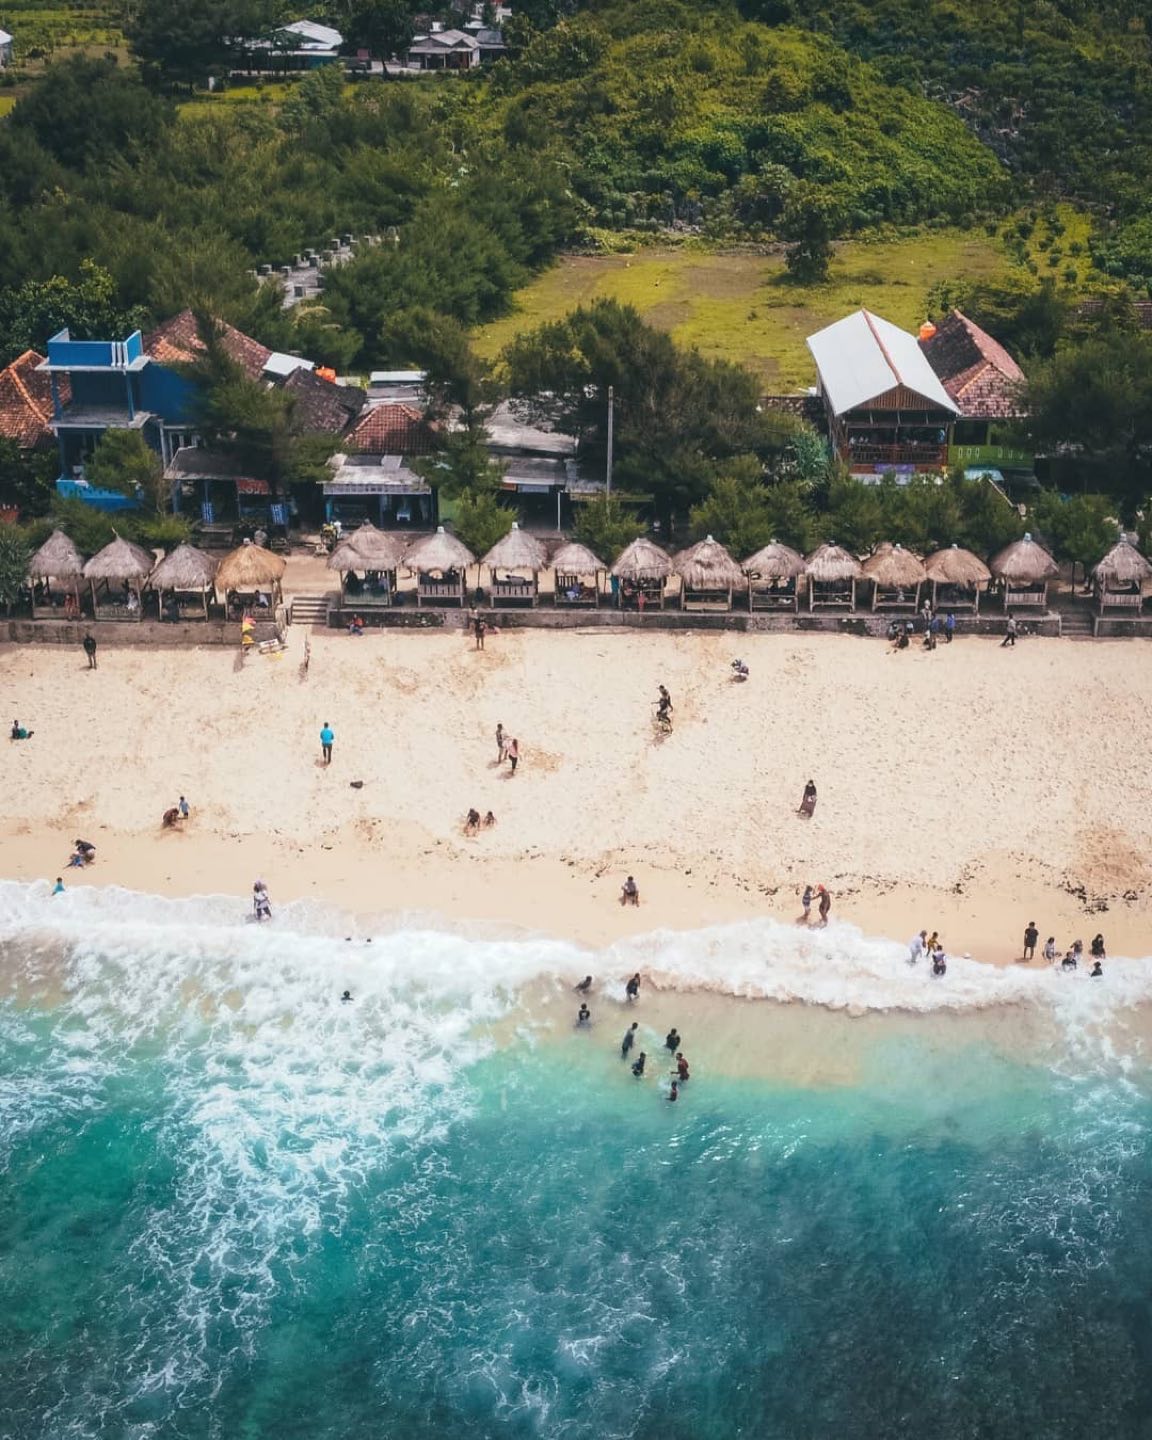 Aerial view of Slili Beach showing people relaxing on the sand and swimming in the clear blue water.